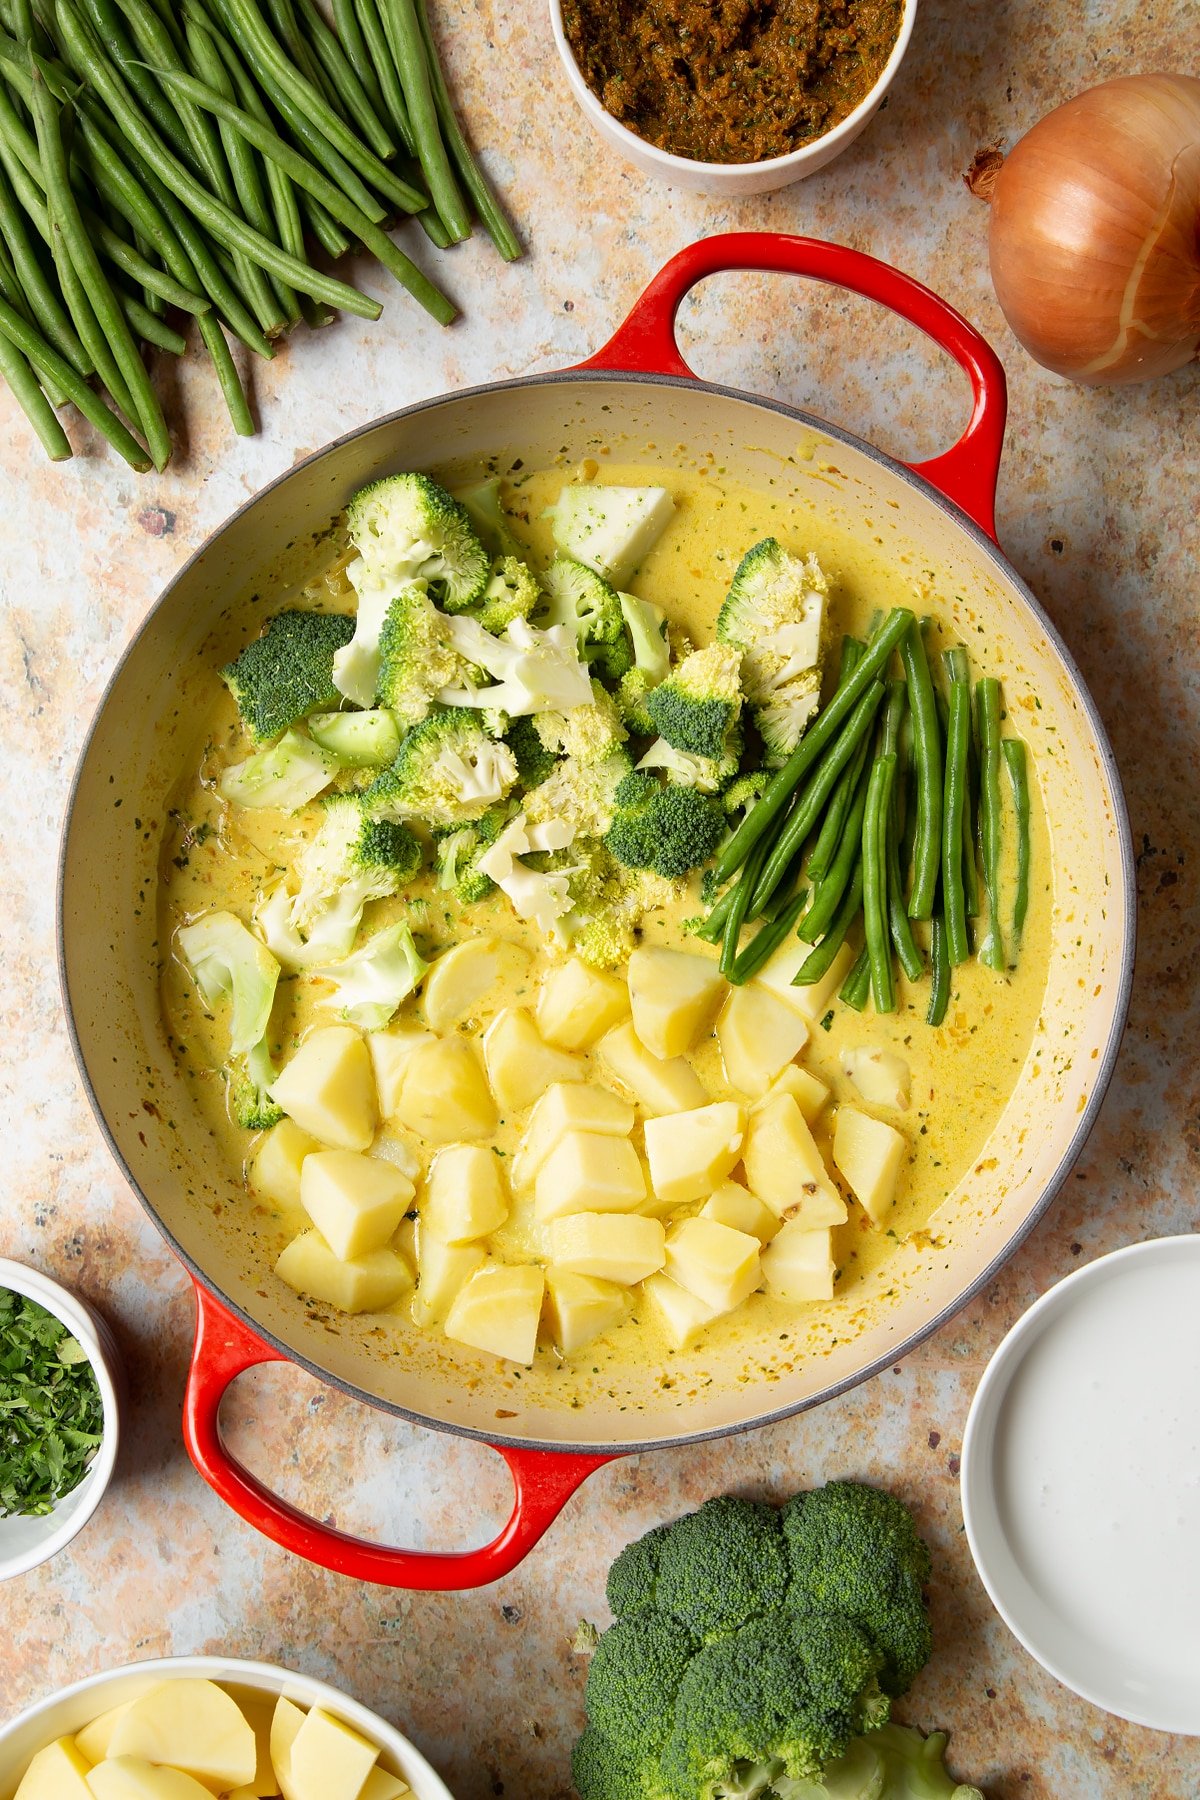 Yellow curry sauce in a large pan with potatoes, green beans and broccoli florets added. Ingredients to make vegetarian yellow curry surround the pan.